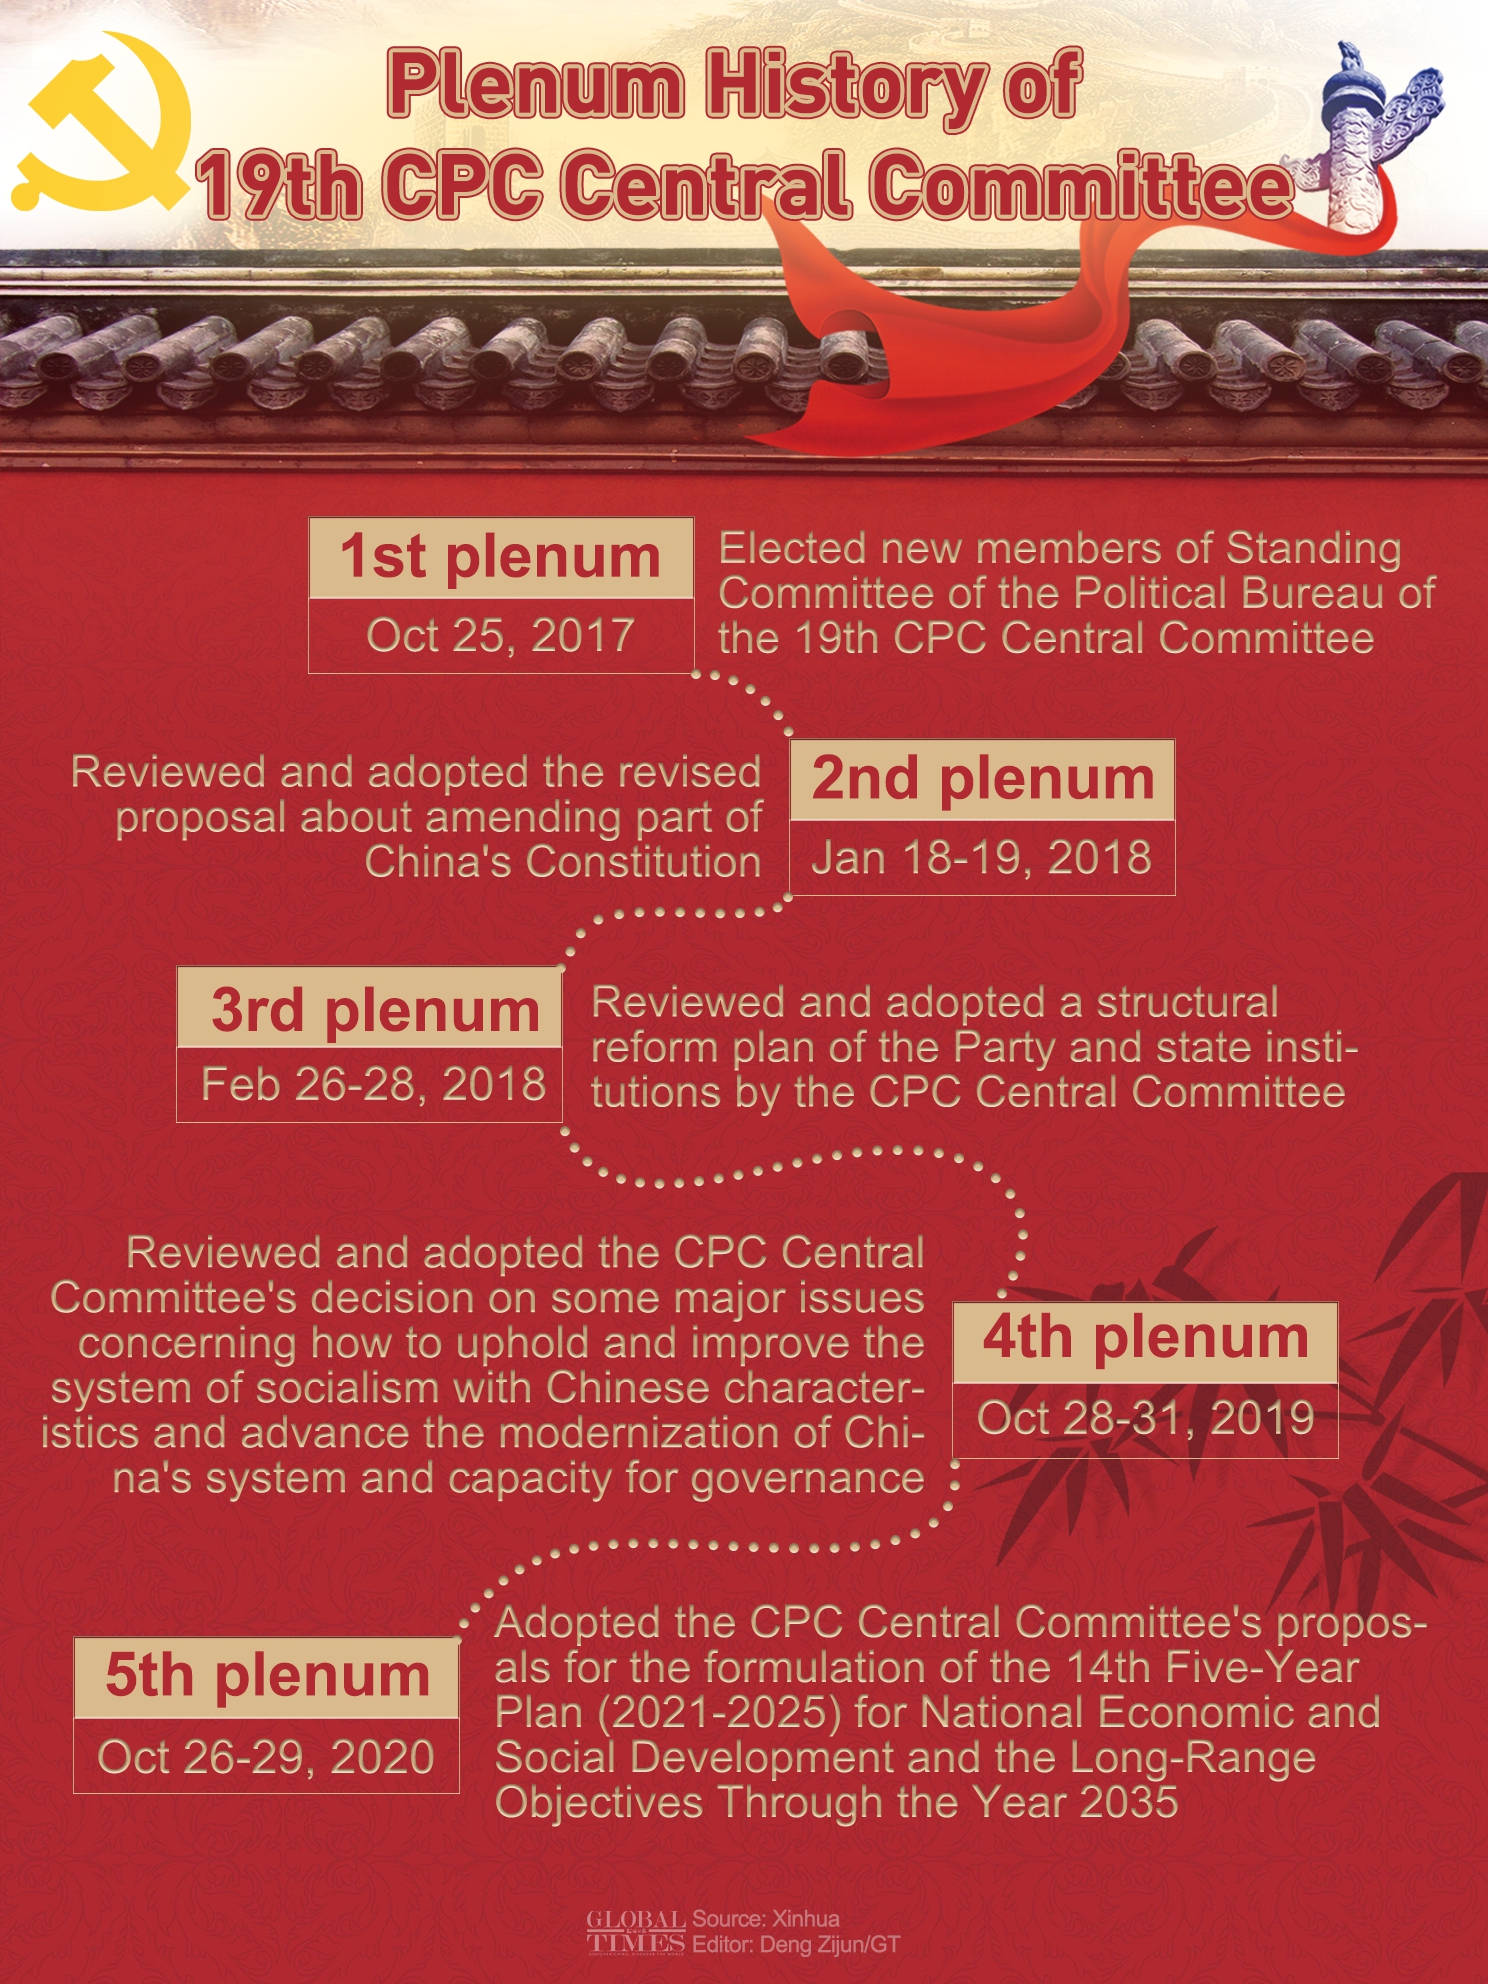 Plenum History of 19th CPC Central Committee.  Infographic: Deng Zijun/Global Times